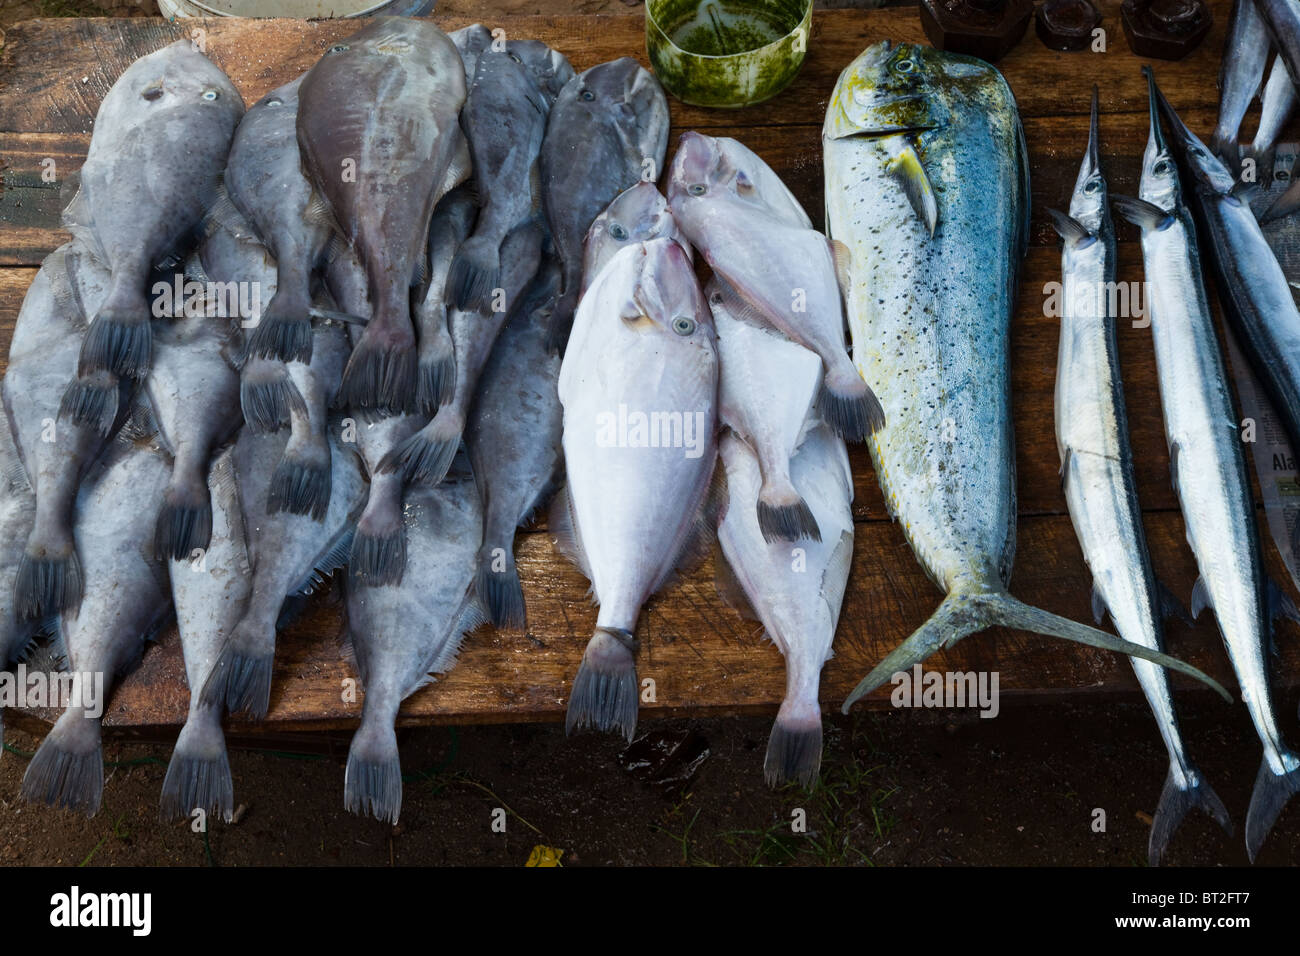 The bounty of Sri Lanka's coast can be seen at the fish markets that spring up on roadsides with baracuda, tuna, swordfish.... Stock Photo